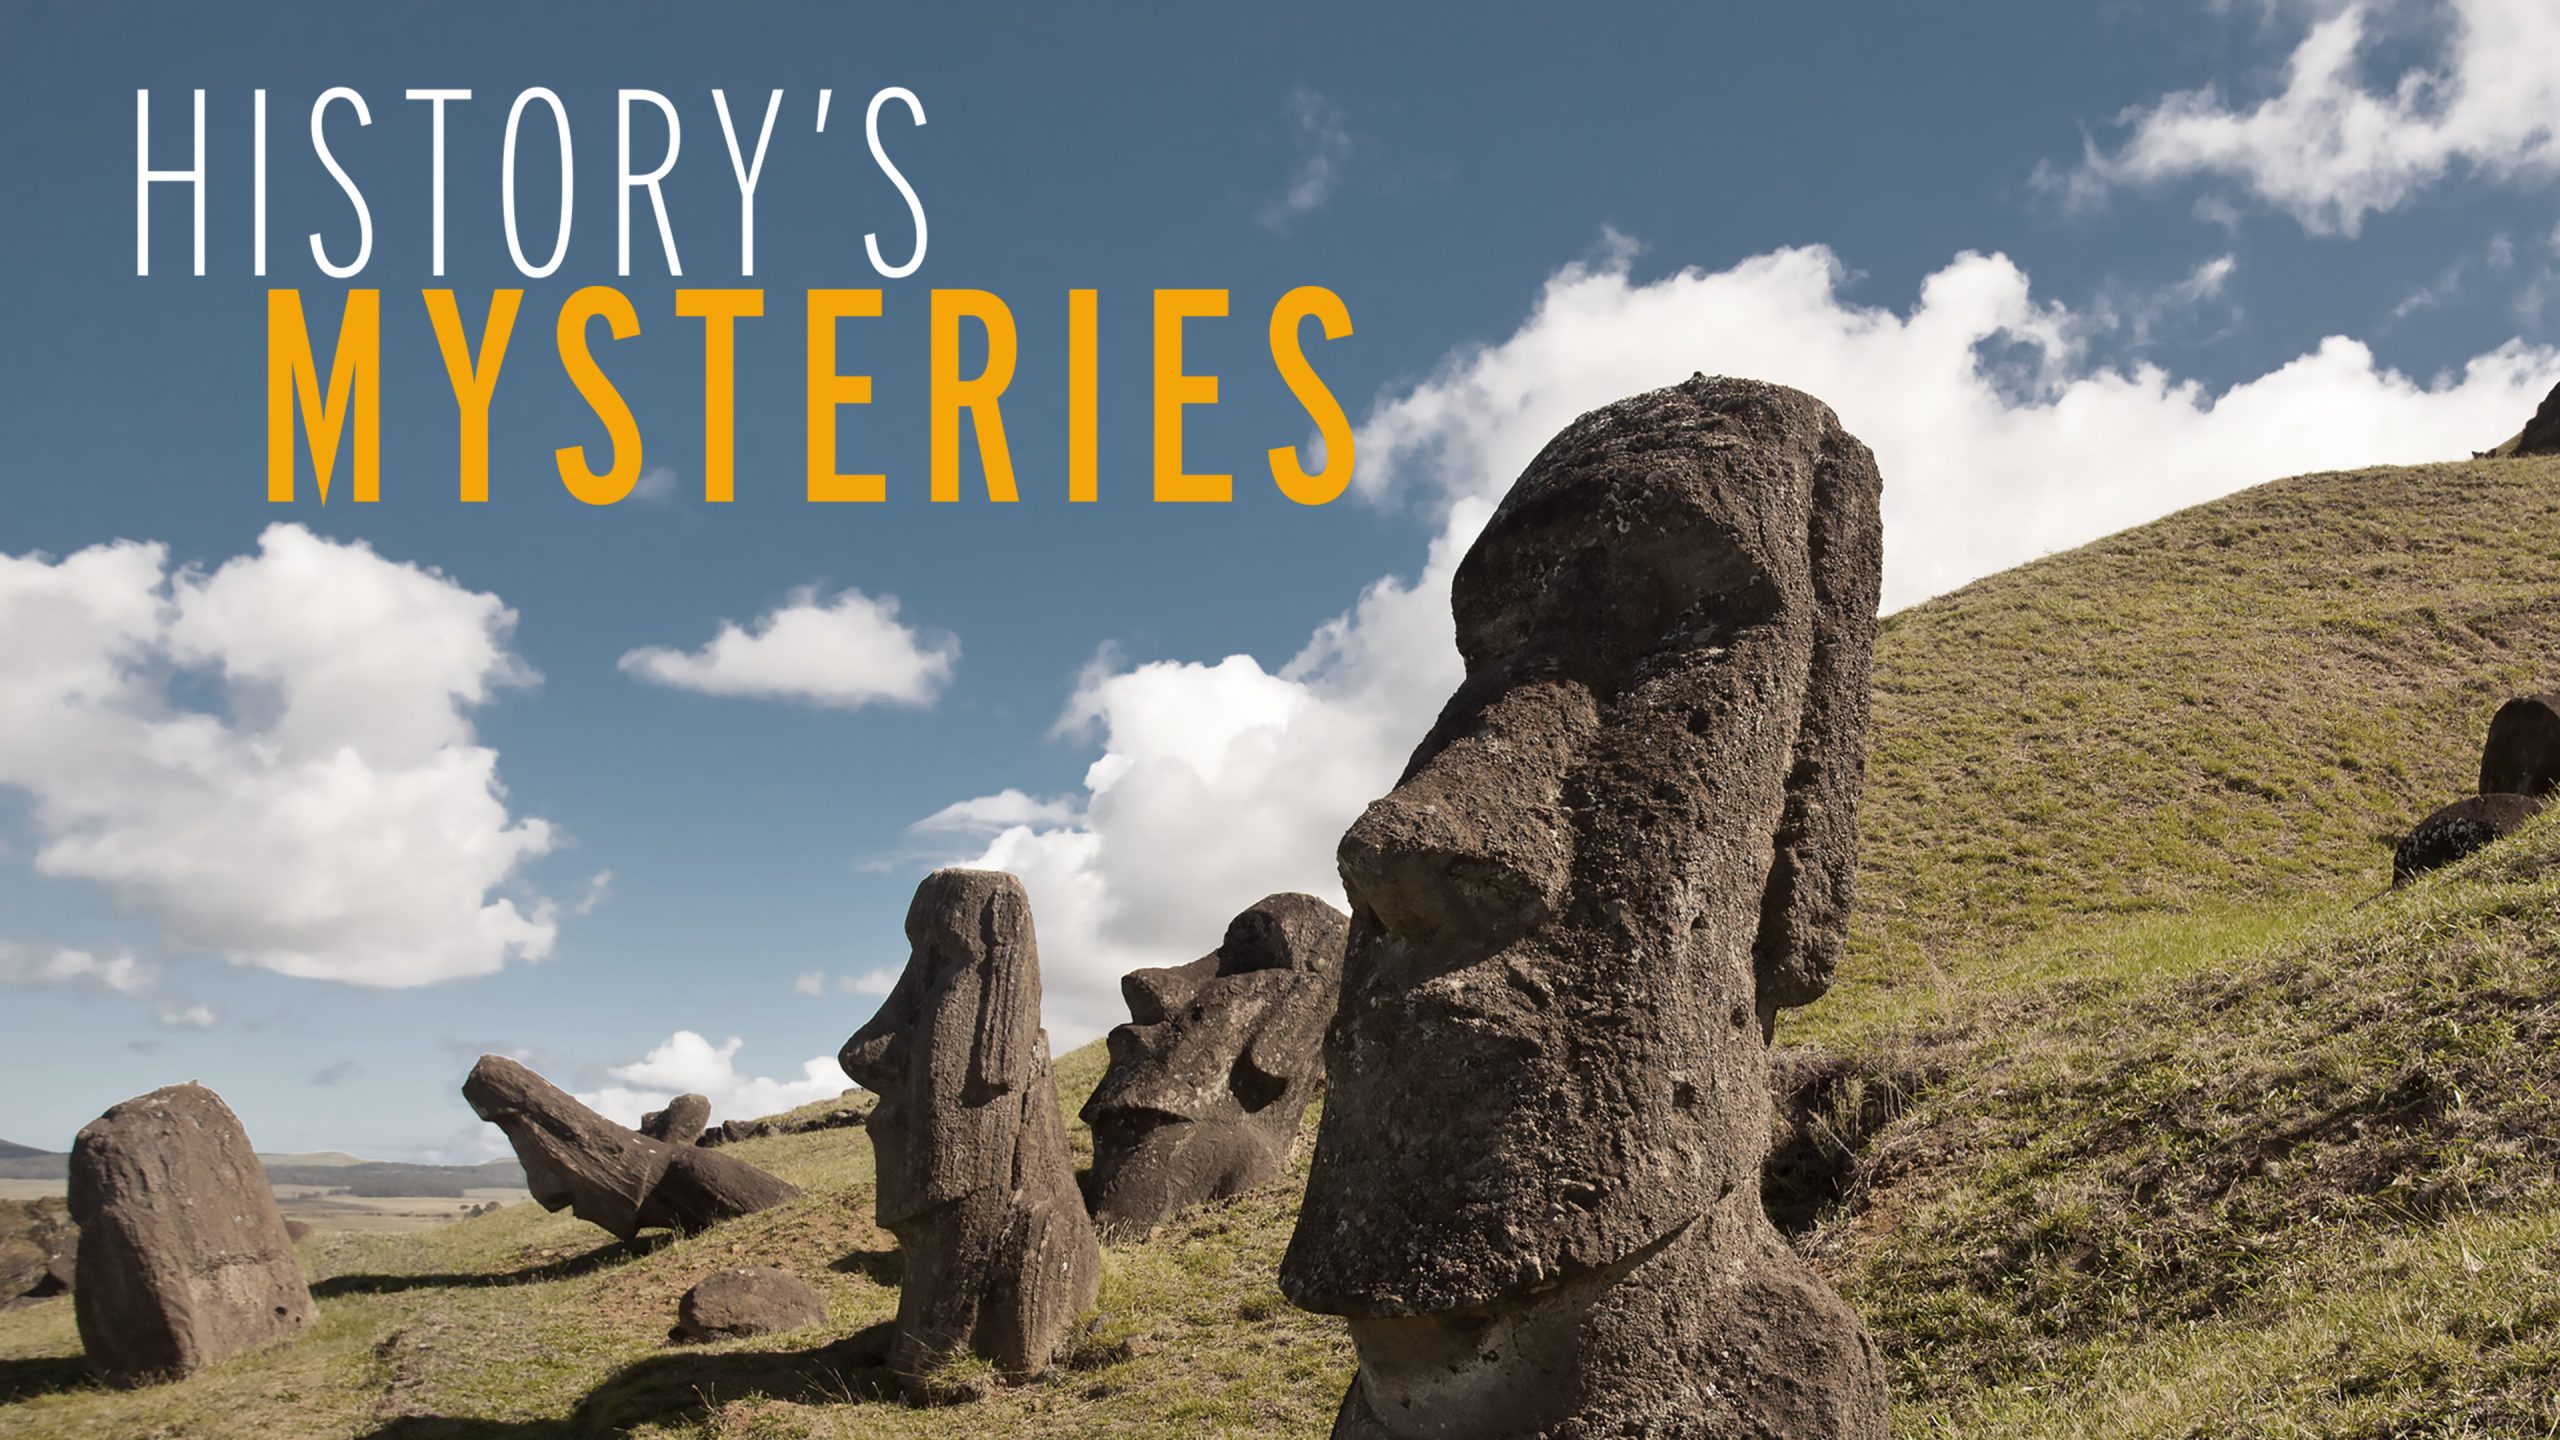 Historys mysteries written with historical rocks in background